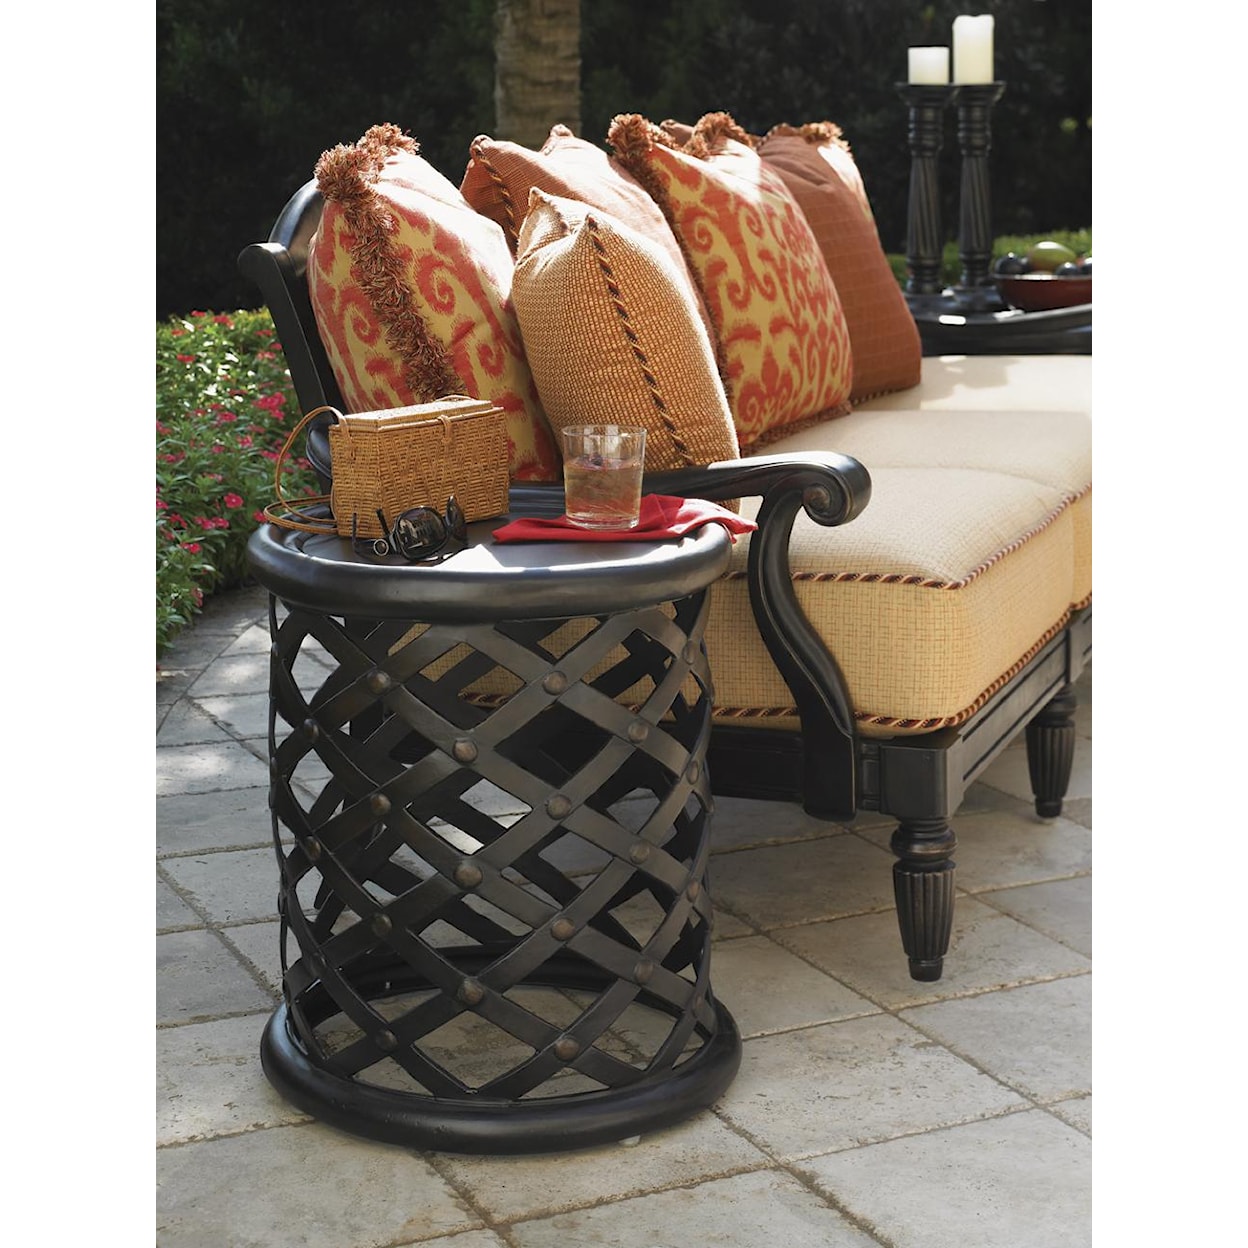 Tommy Bahama Outdoor Living Kingstown Sedona Accent Table